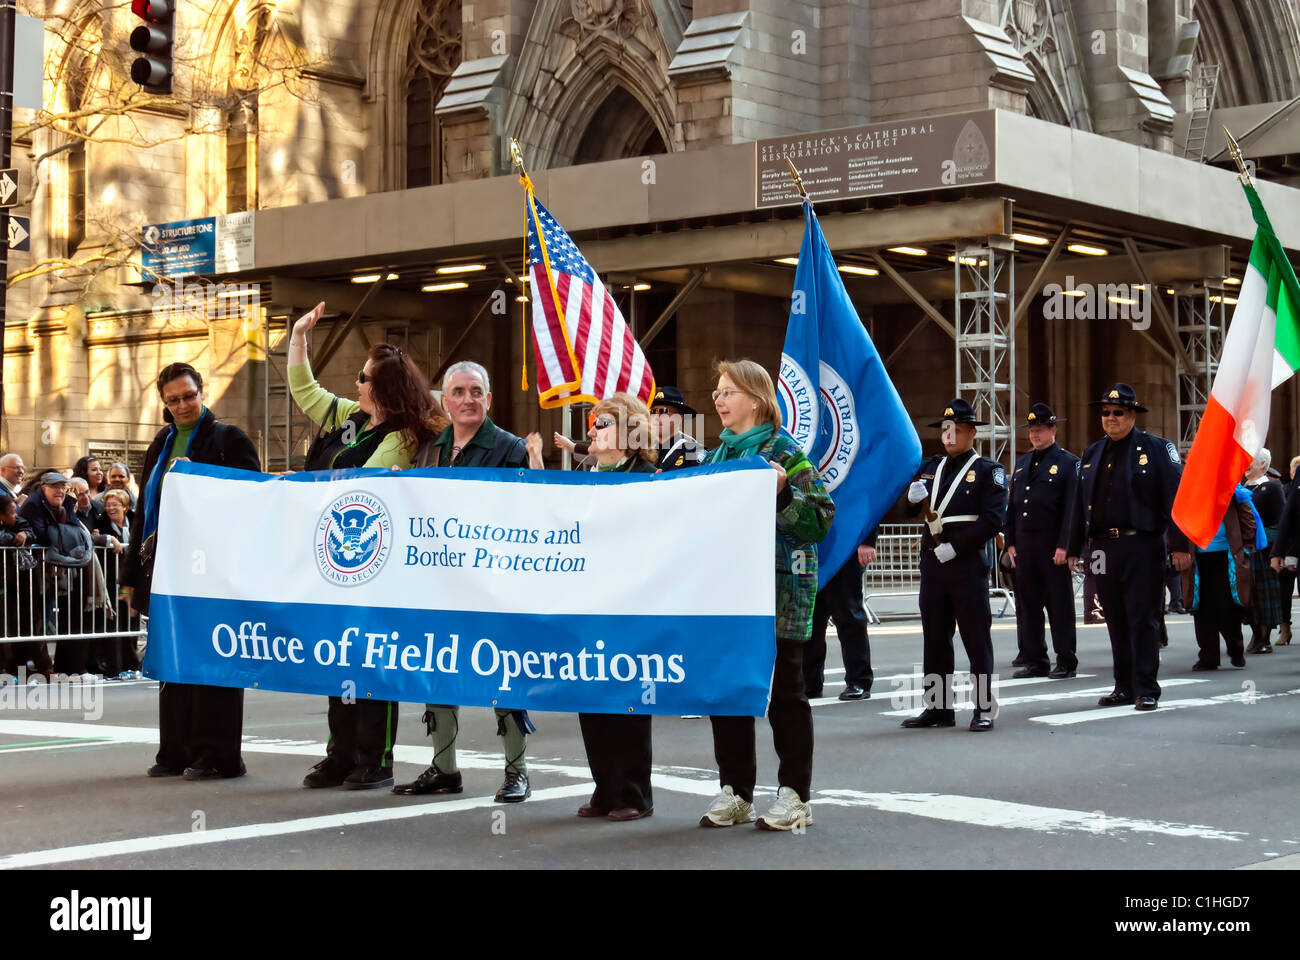 17. März 2011 - NYC: US Customs and Border Protection "Office of Field Operations" marschieren in St. Patricks Day Parade Stockfoto